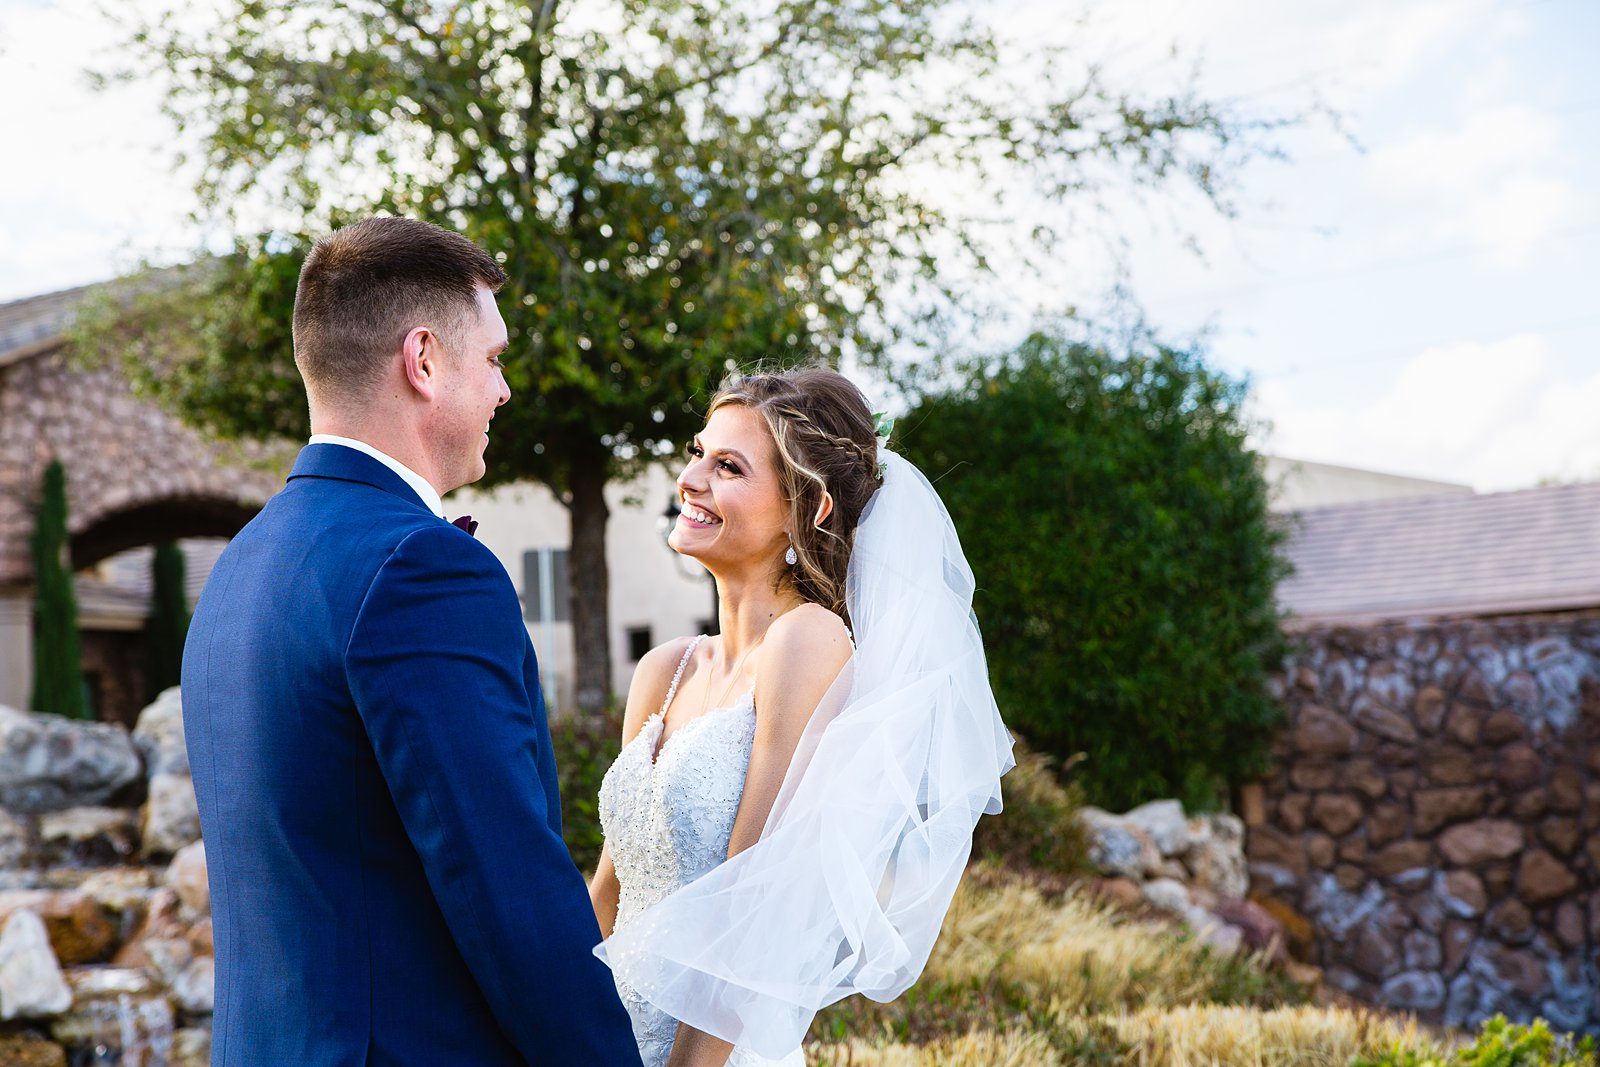 Bride and Groom laughing together during their Superstition Manor wedding by Arizona wedding photographer PMA Photography.